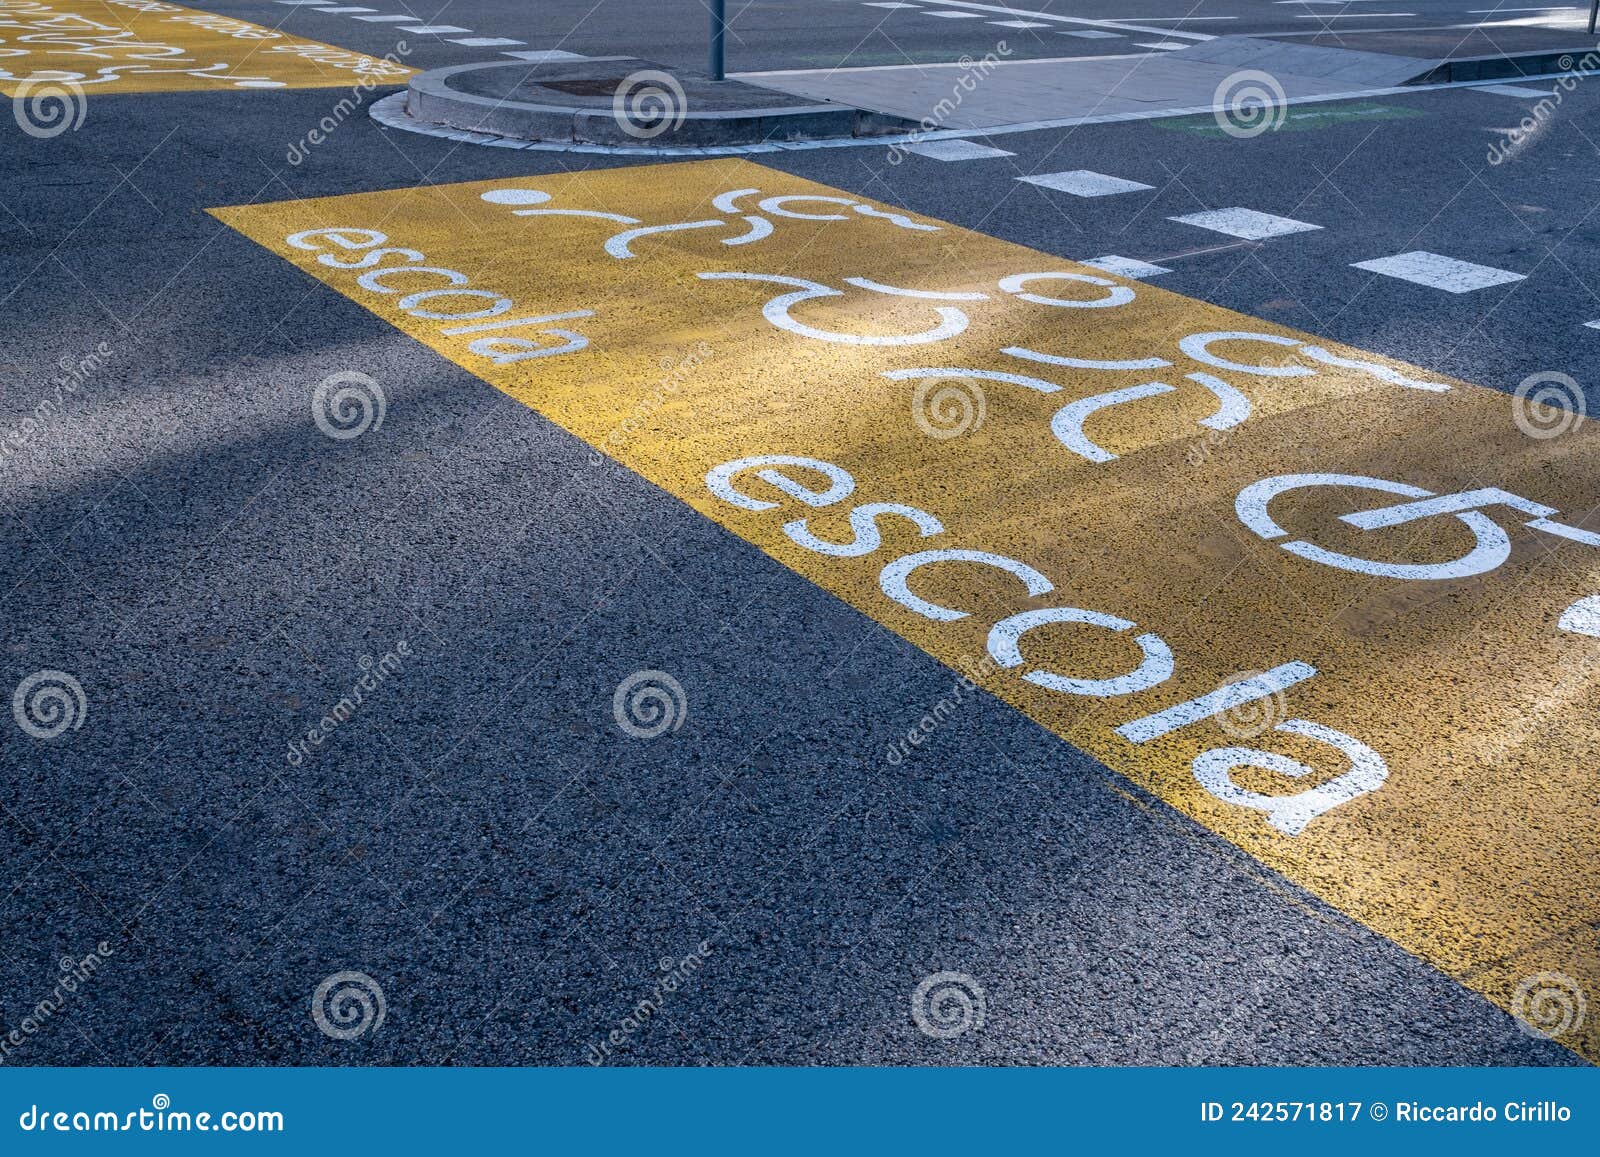 road with school crossing sign indicates children crossing the street - escola